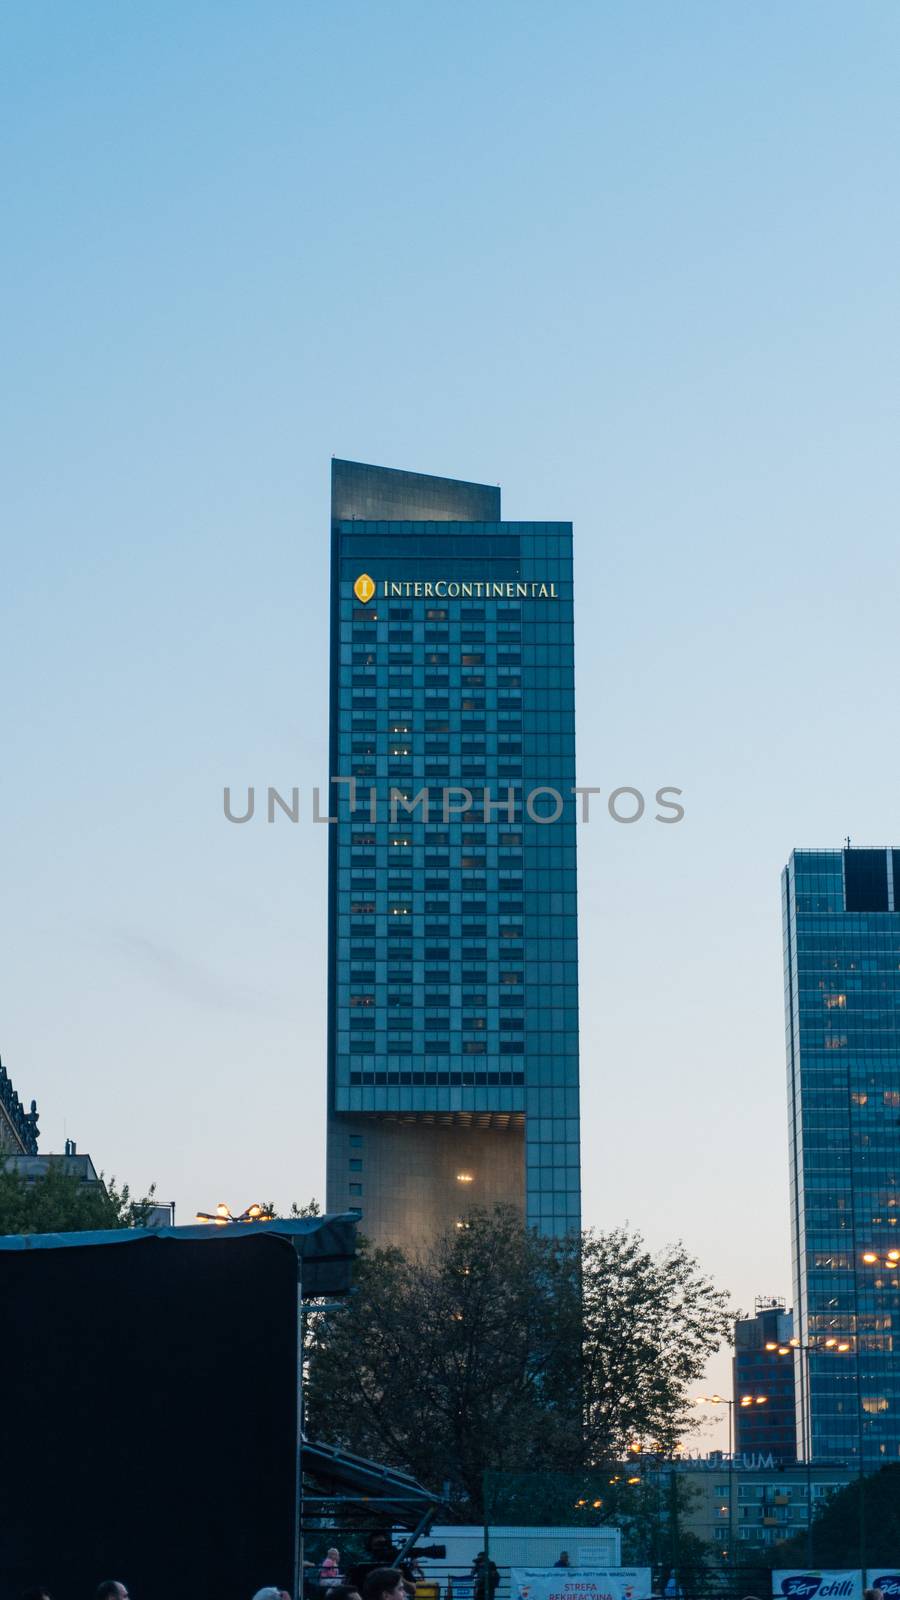 Intercontinental hotel in Warsaw, the highest hotel in Poland and third highest in Europe, on September, 2016. Well-known for a unique empty space in the structure.